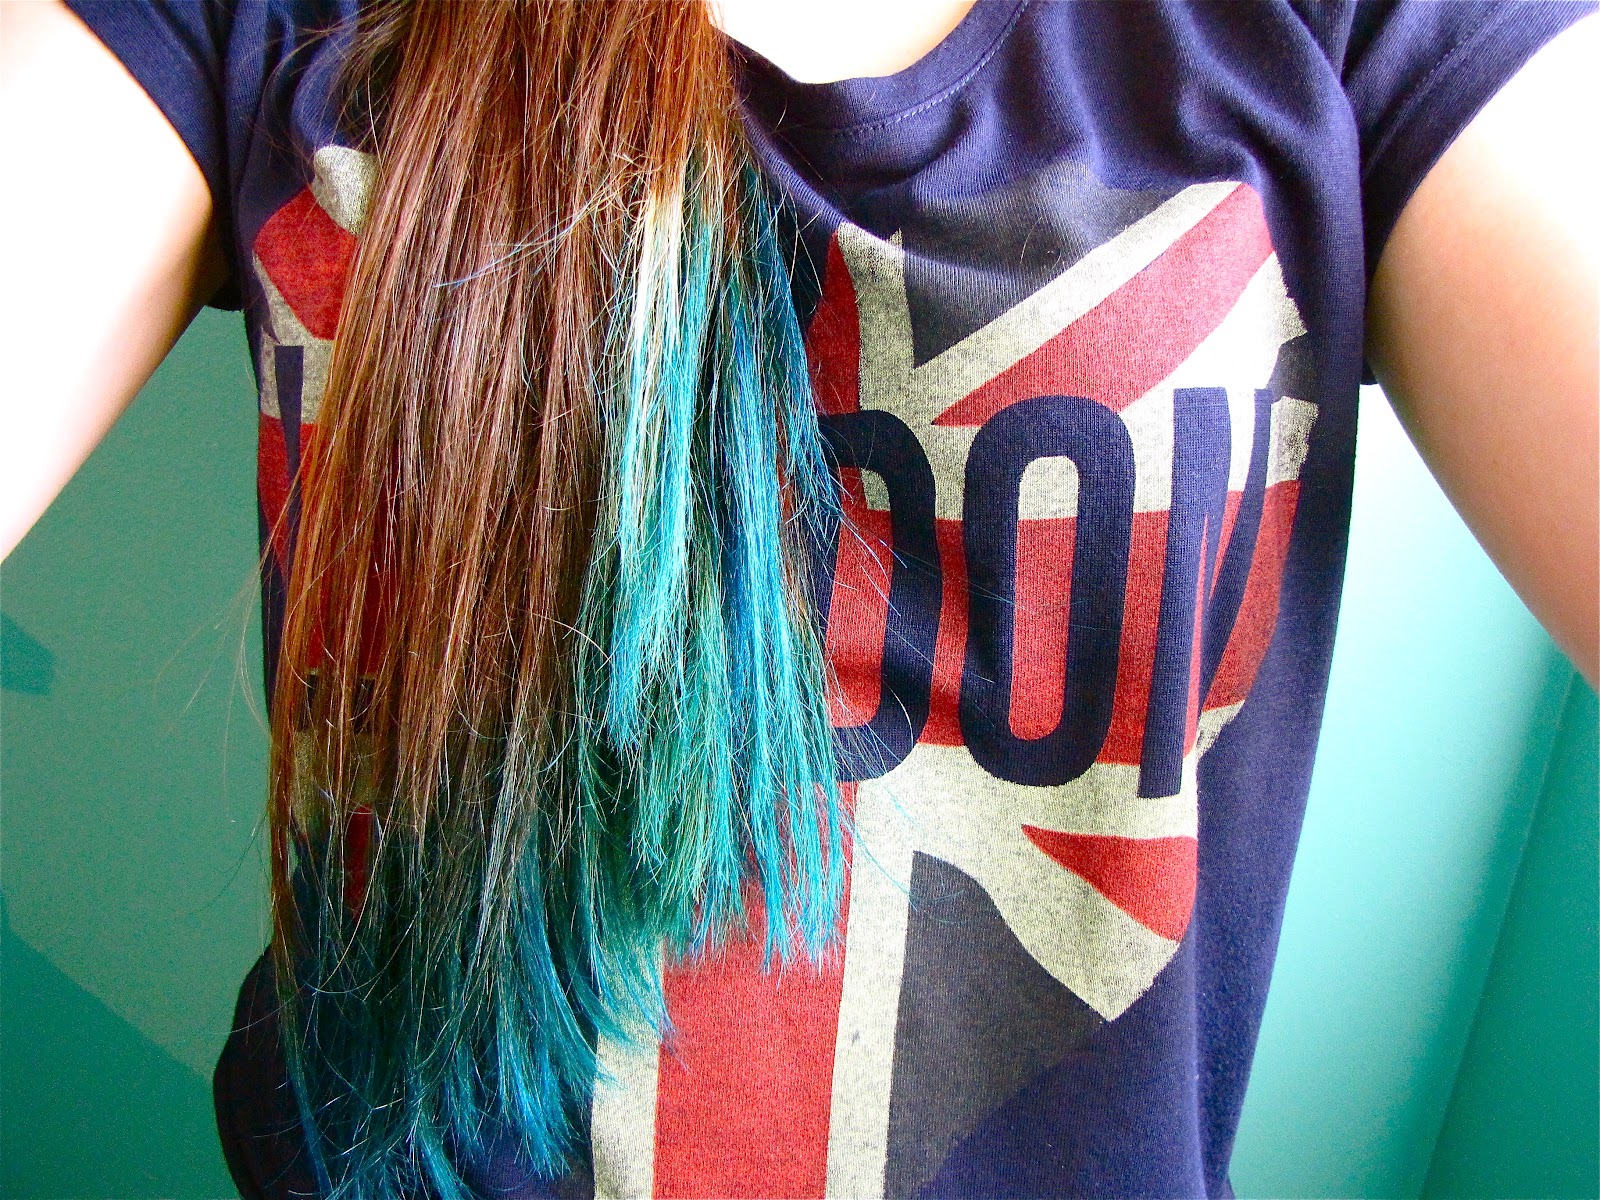 2. "Blue Hair with Turquoise Tips: Inspiration and Ideas" - wide 5